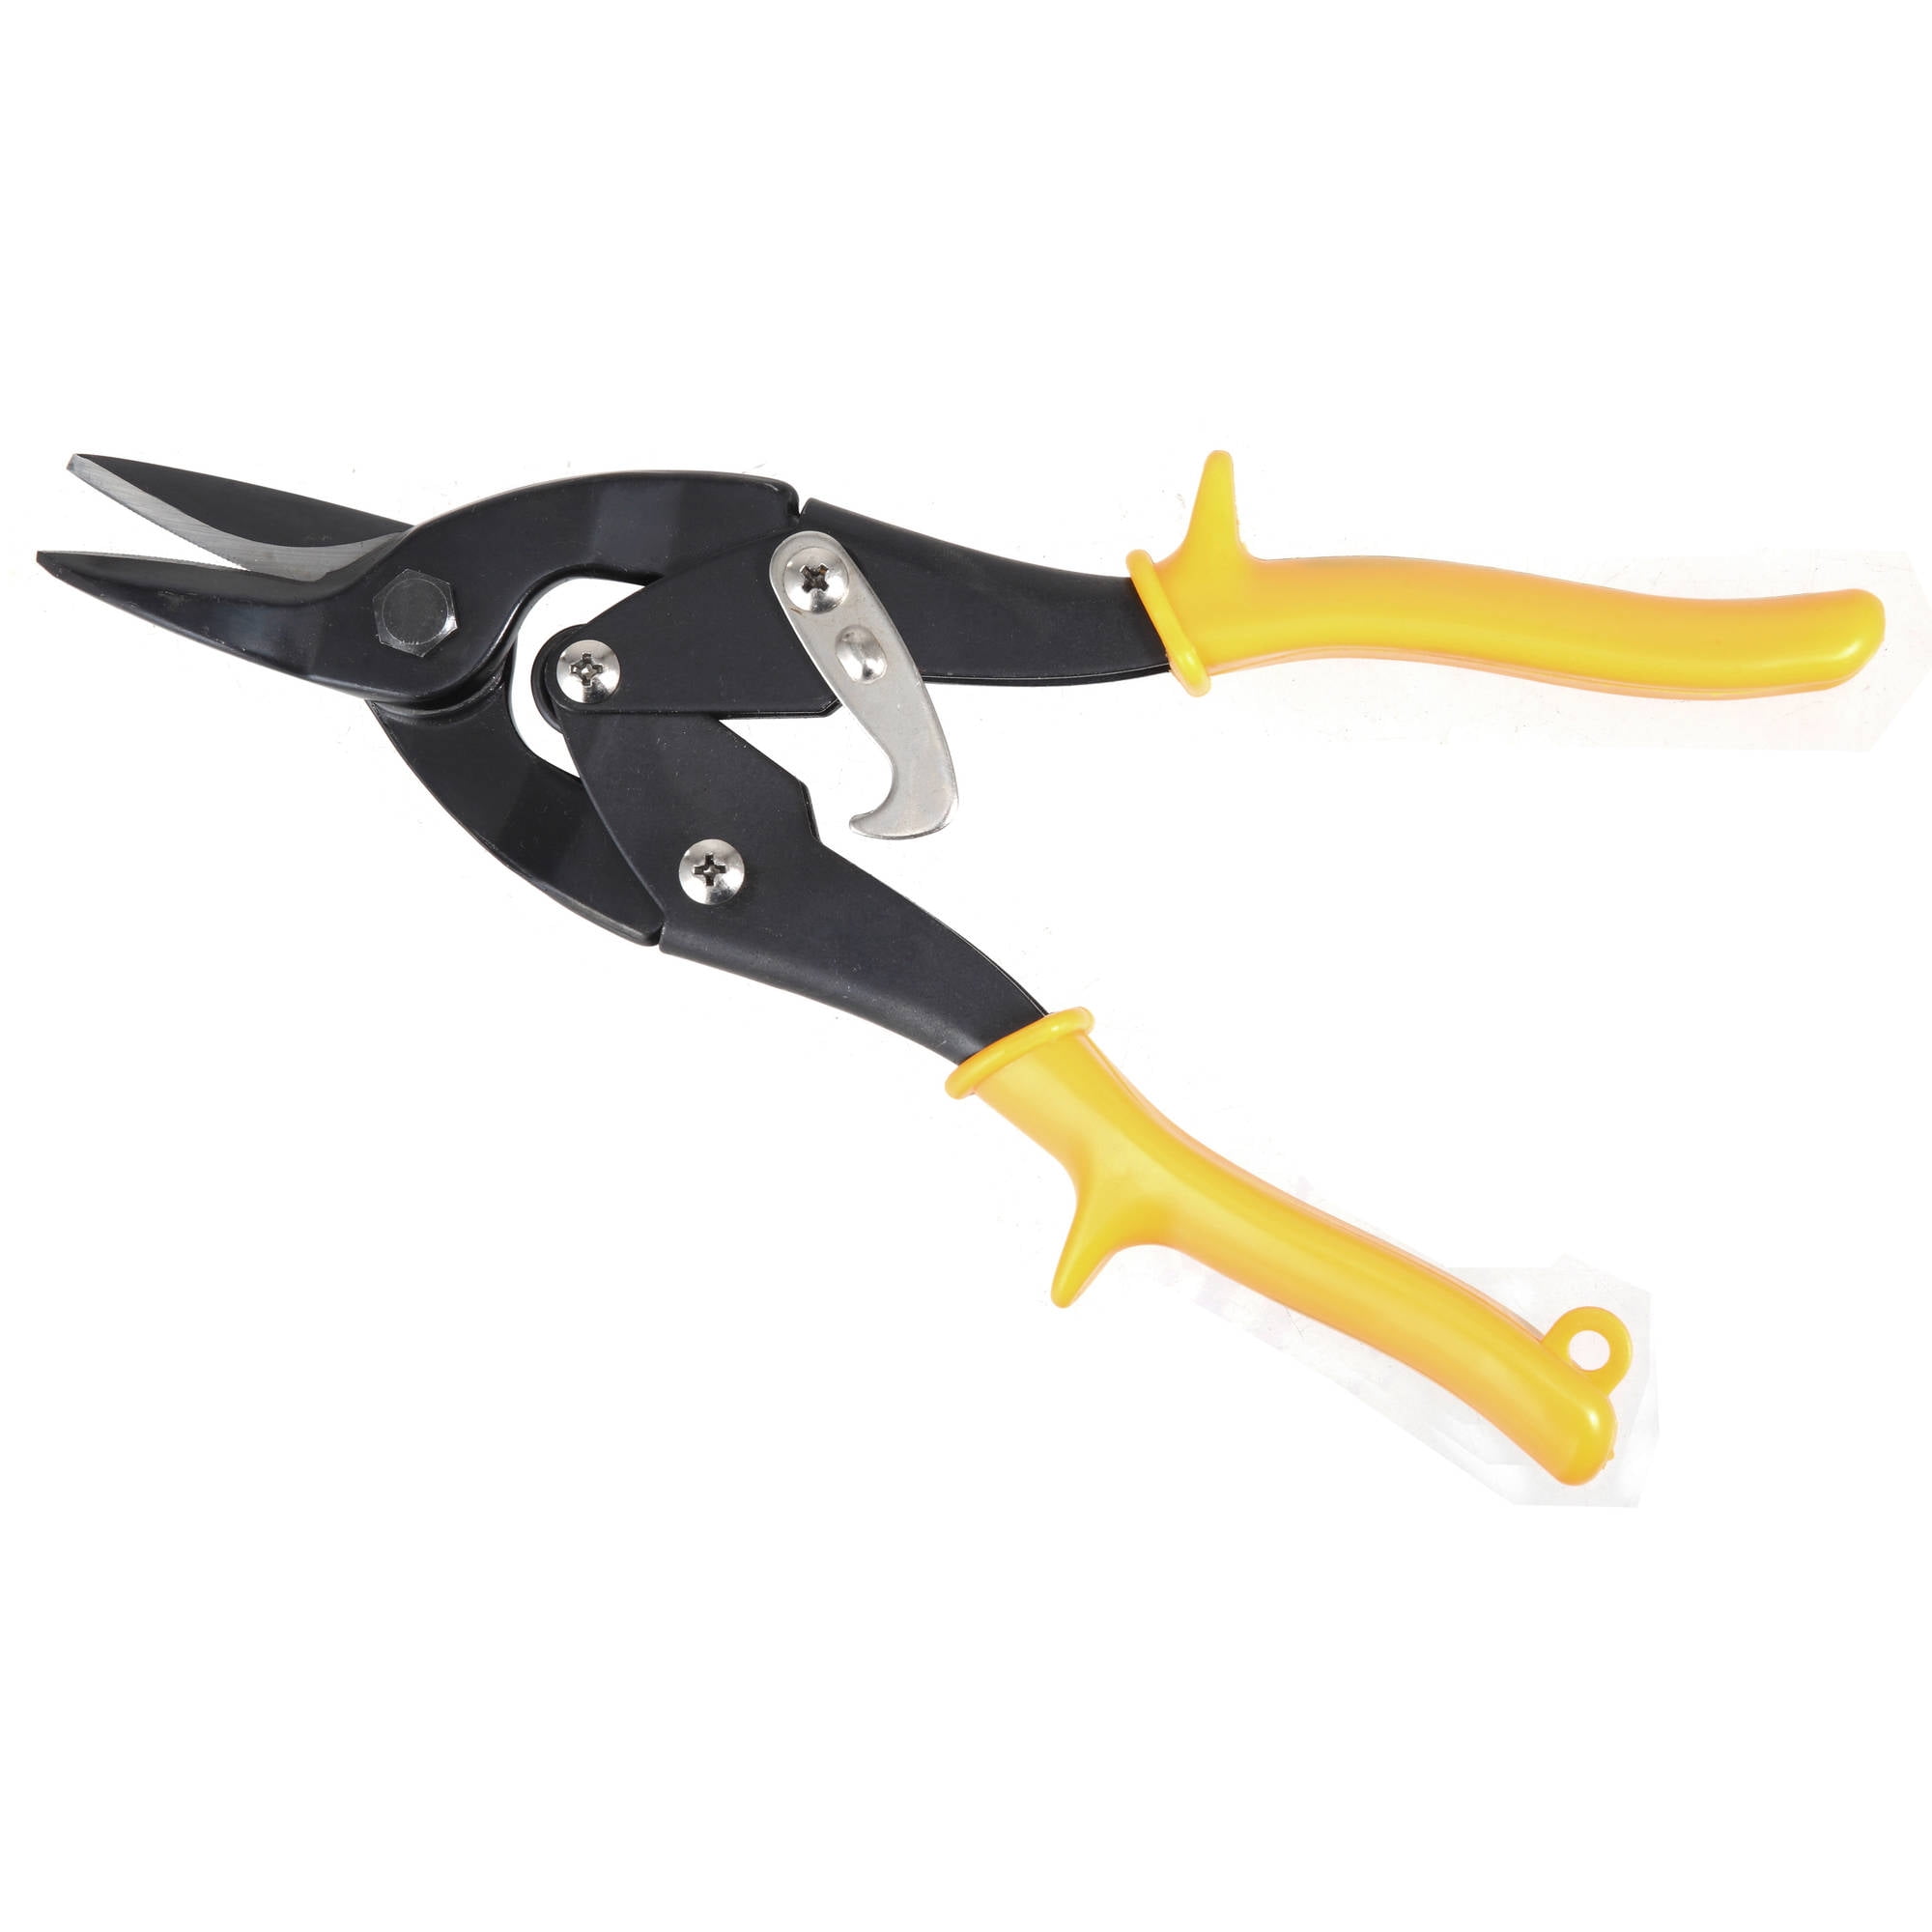 Picard 0070610-240 9.45 Aviation snip with right-cutting